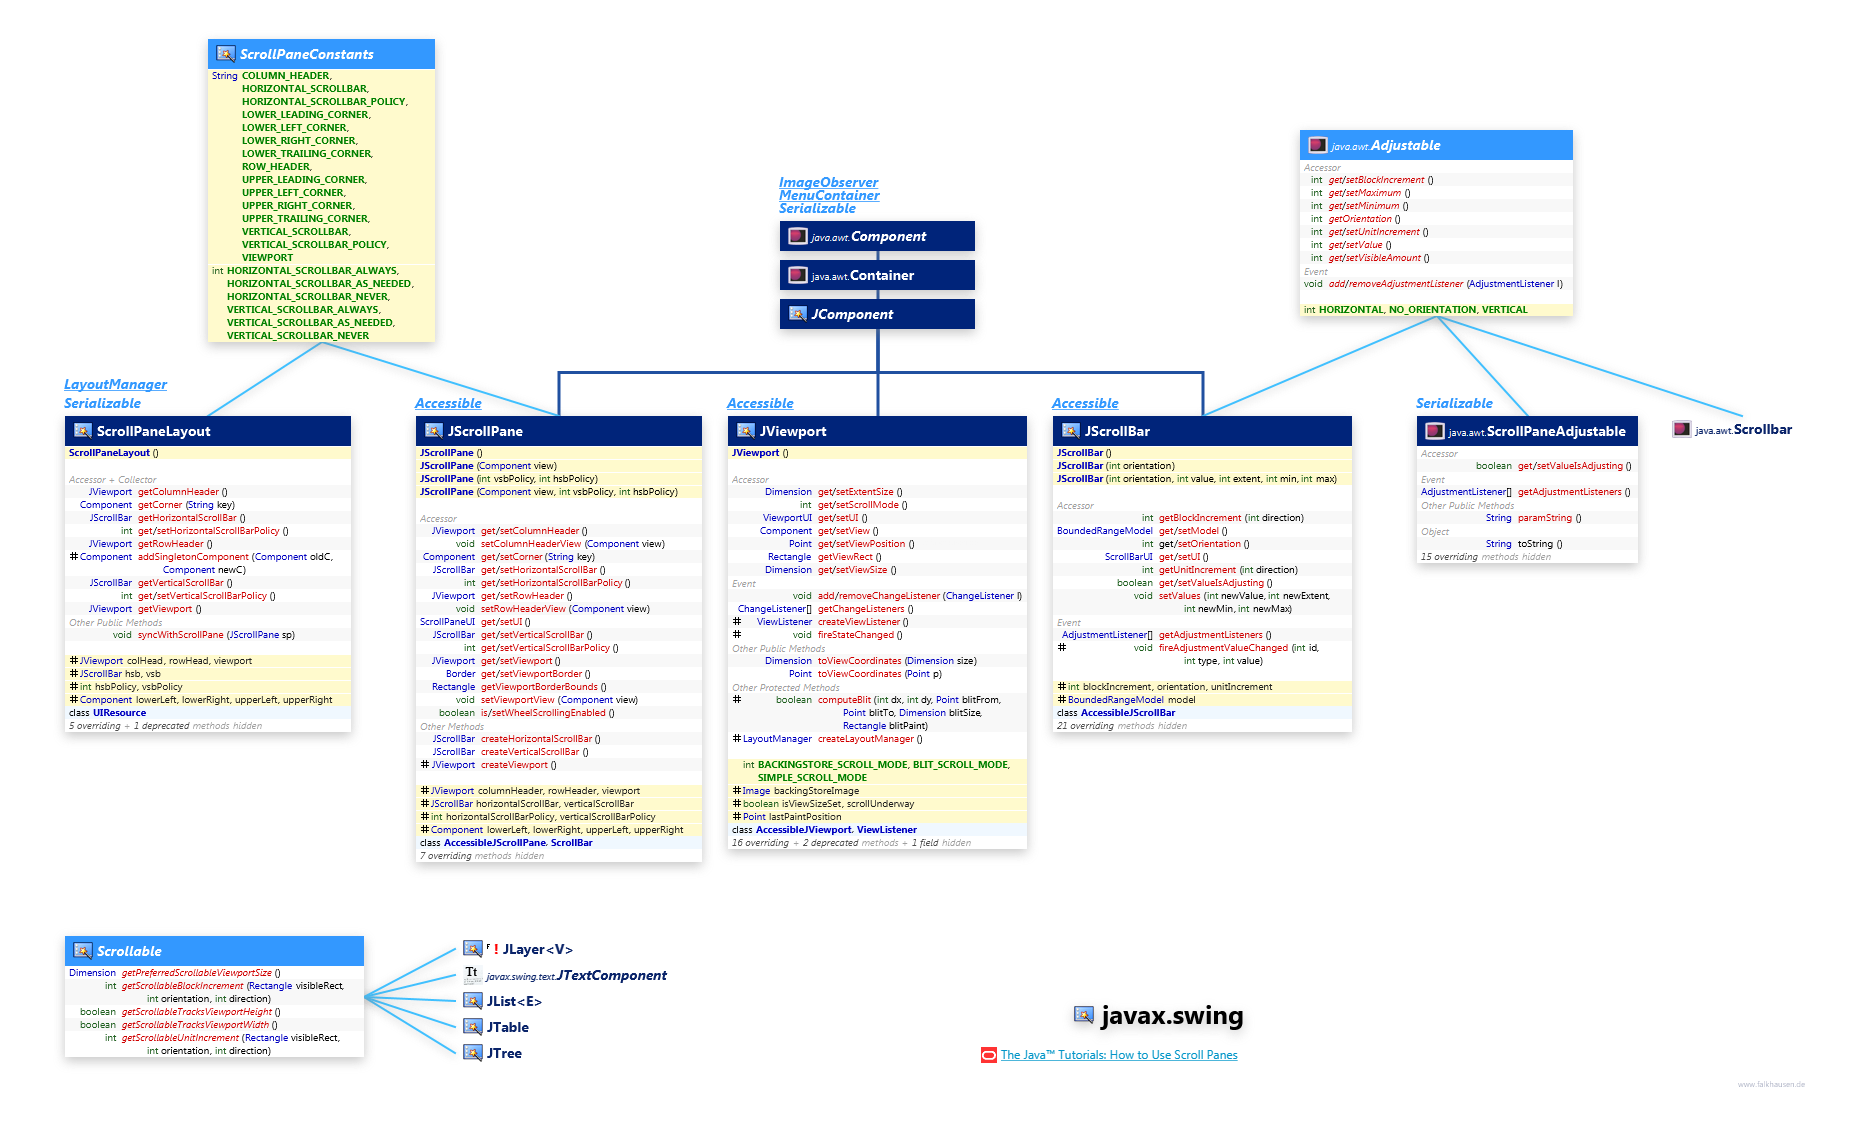 javax.swing Scrolling class diagram and api documentation for Java 7